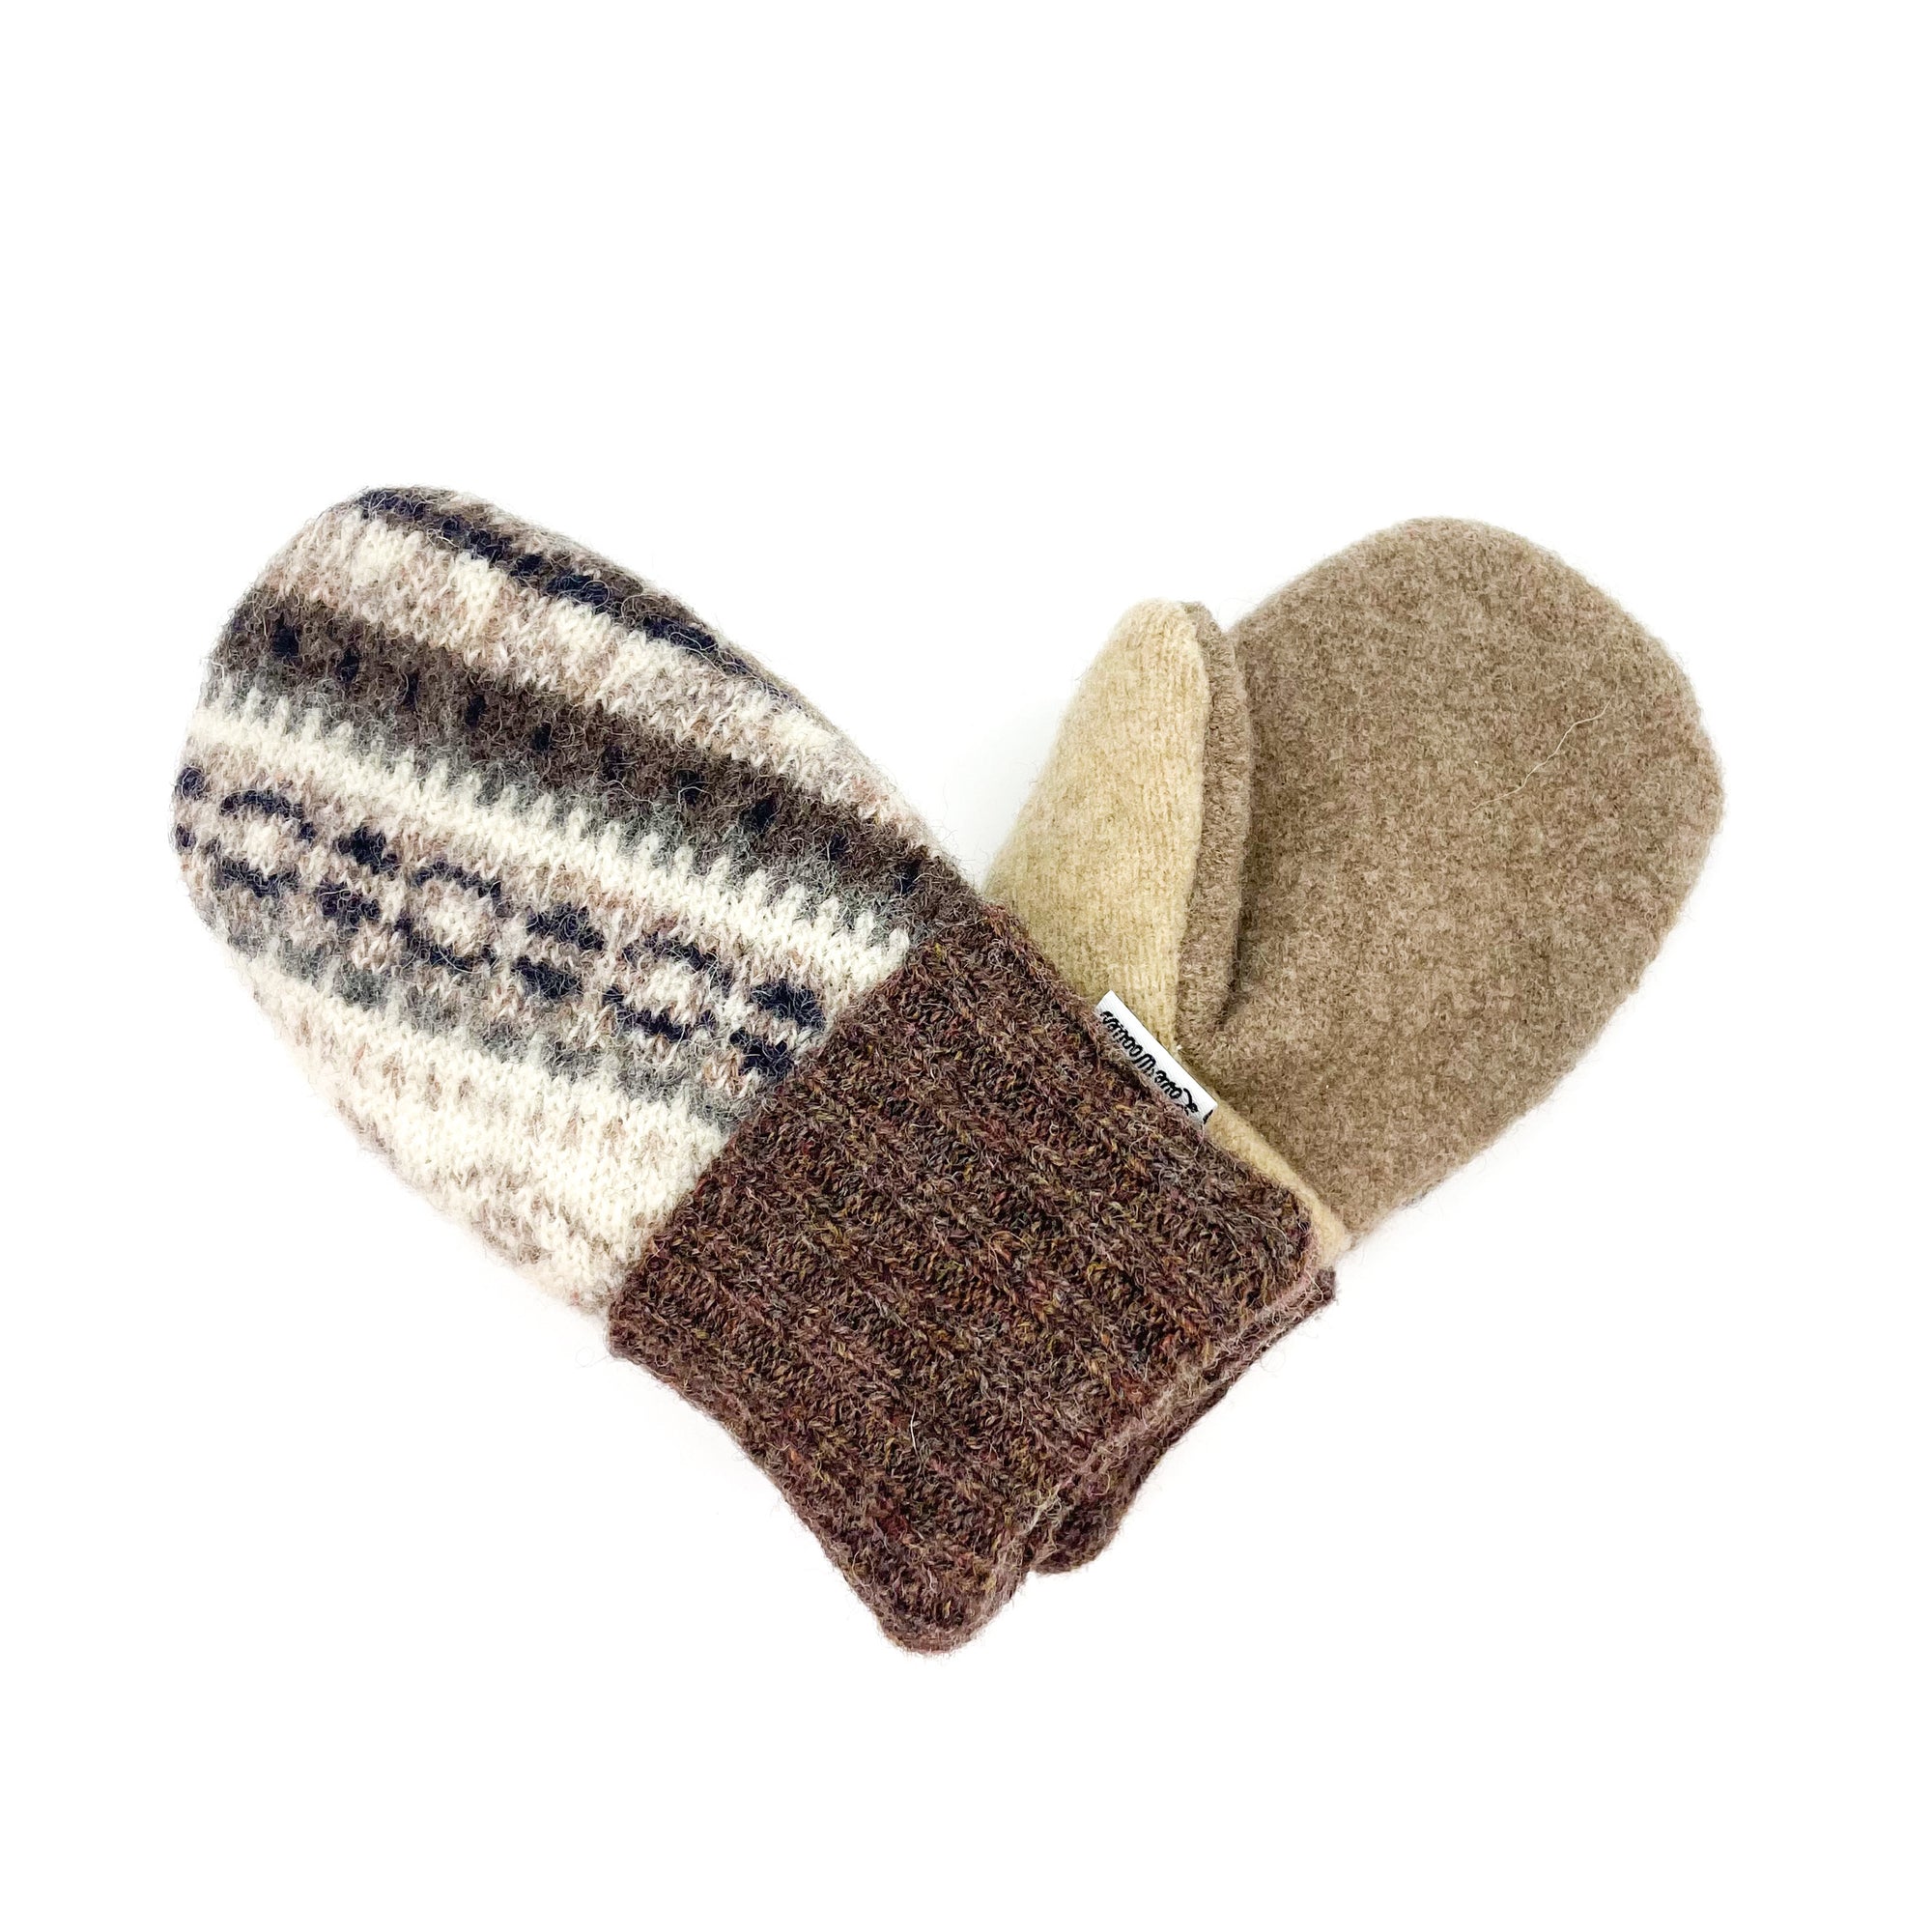 Large Kid's Wool Sweater Mittens | Cheering On Our Team